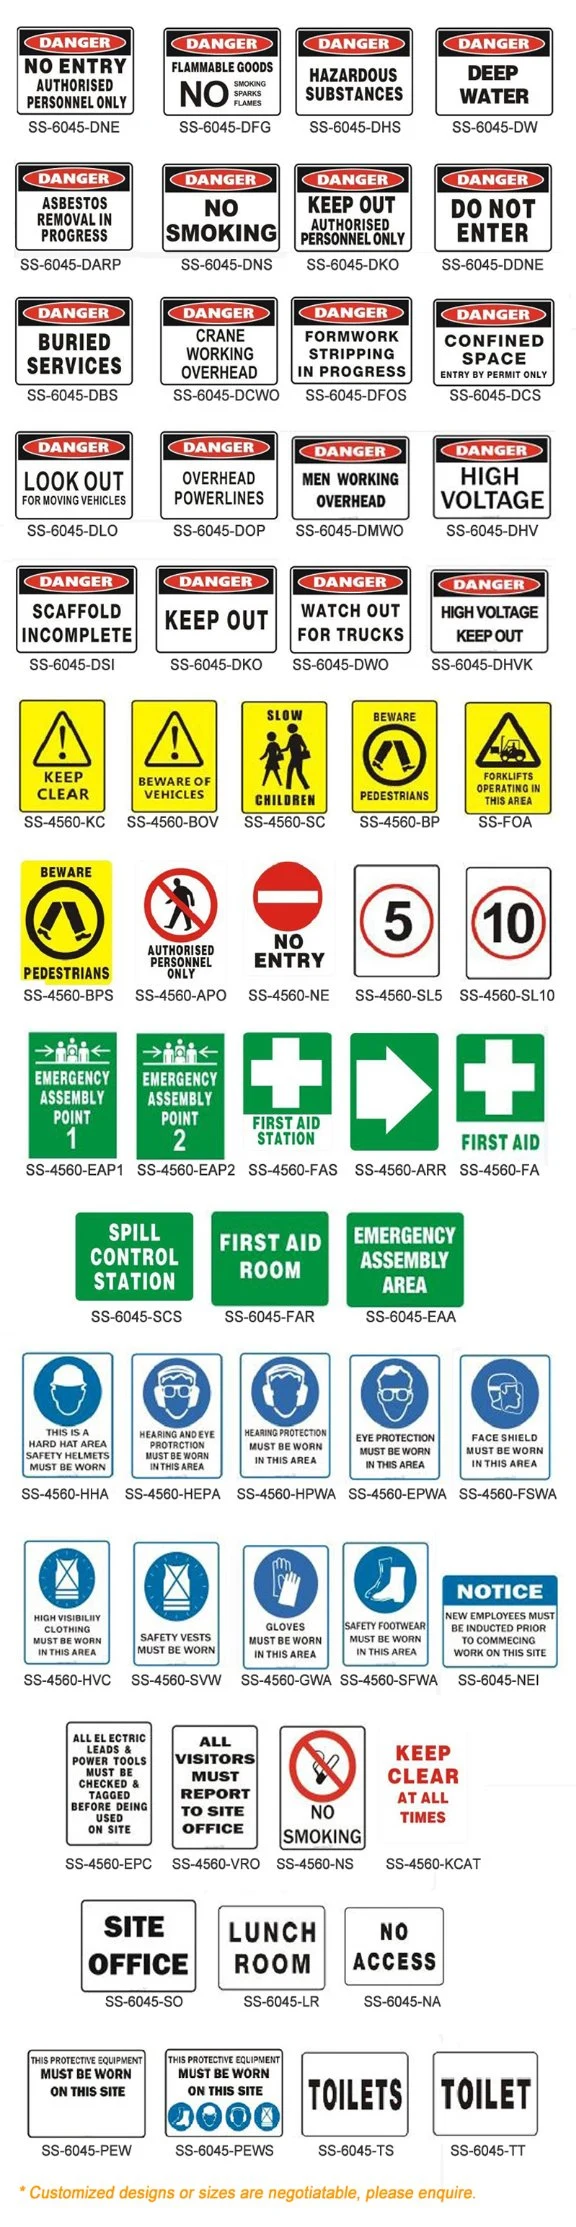 Manufacturer Health and Safety Sign Boards Prohibition Road Hazard Warning Safety Signs